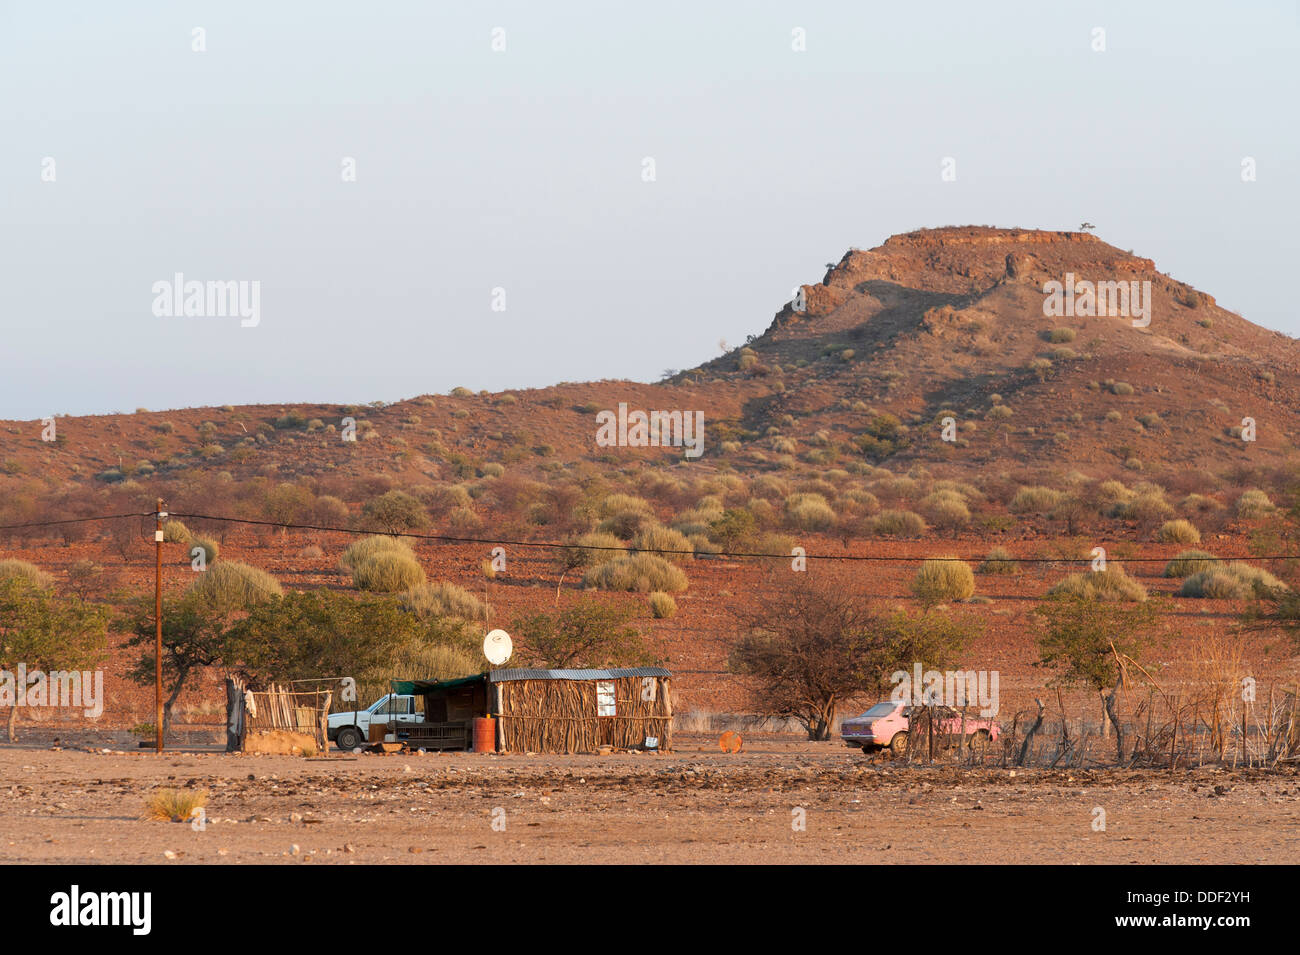 Two cars parked at a kiosk with satellite dish in a dry landscape, Kunene Region, Namibia Stock Photo